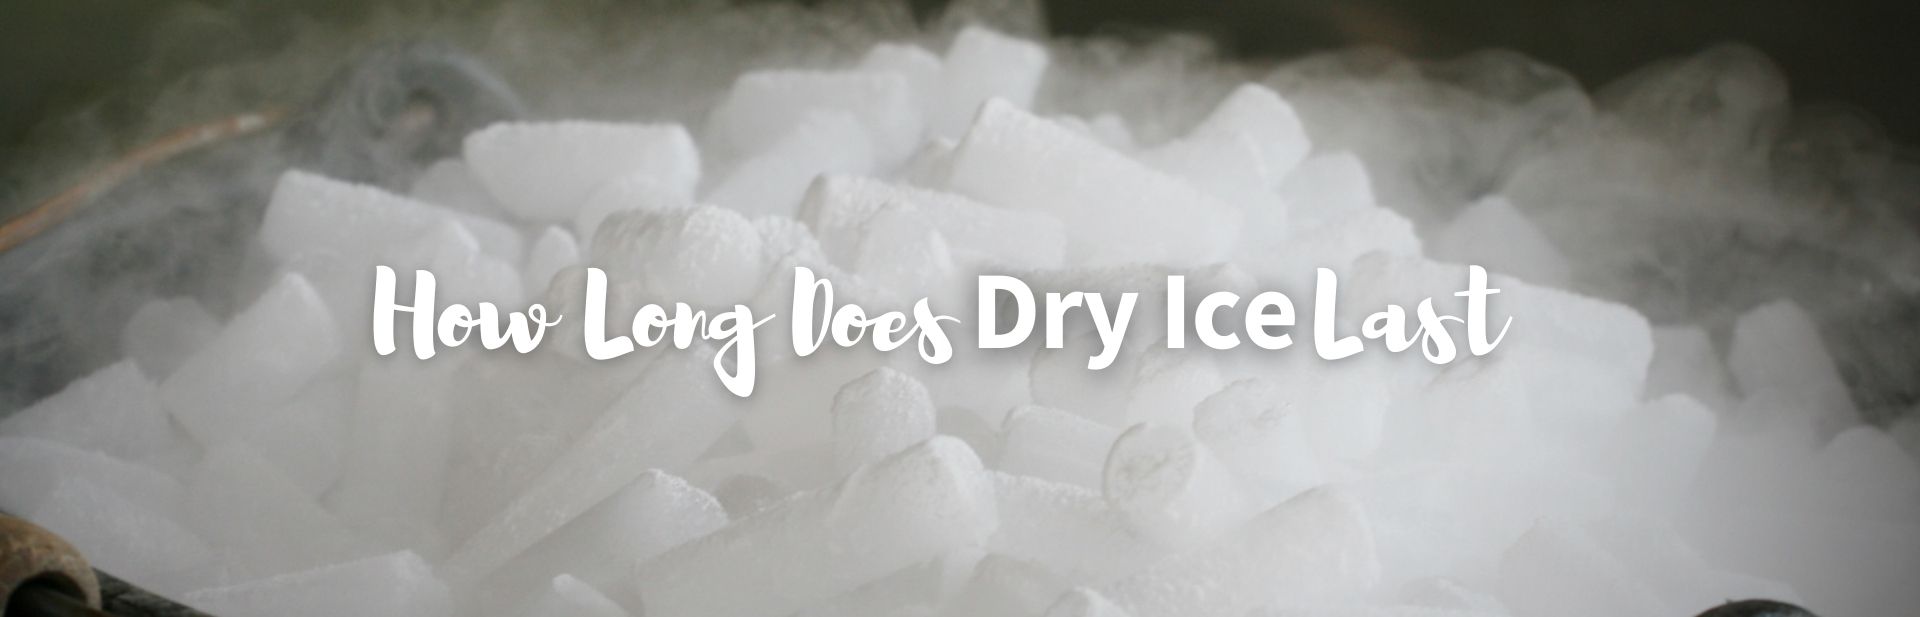 How Long Does Dry Ice Last? Essential Tips & Tricks!